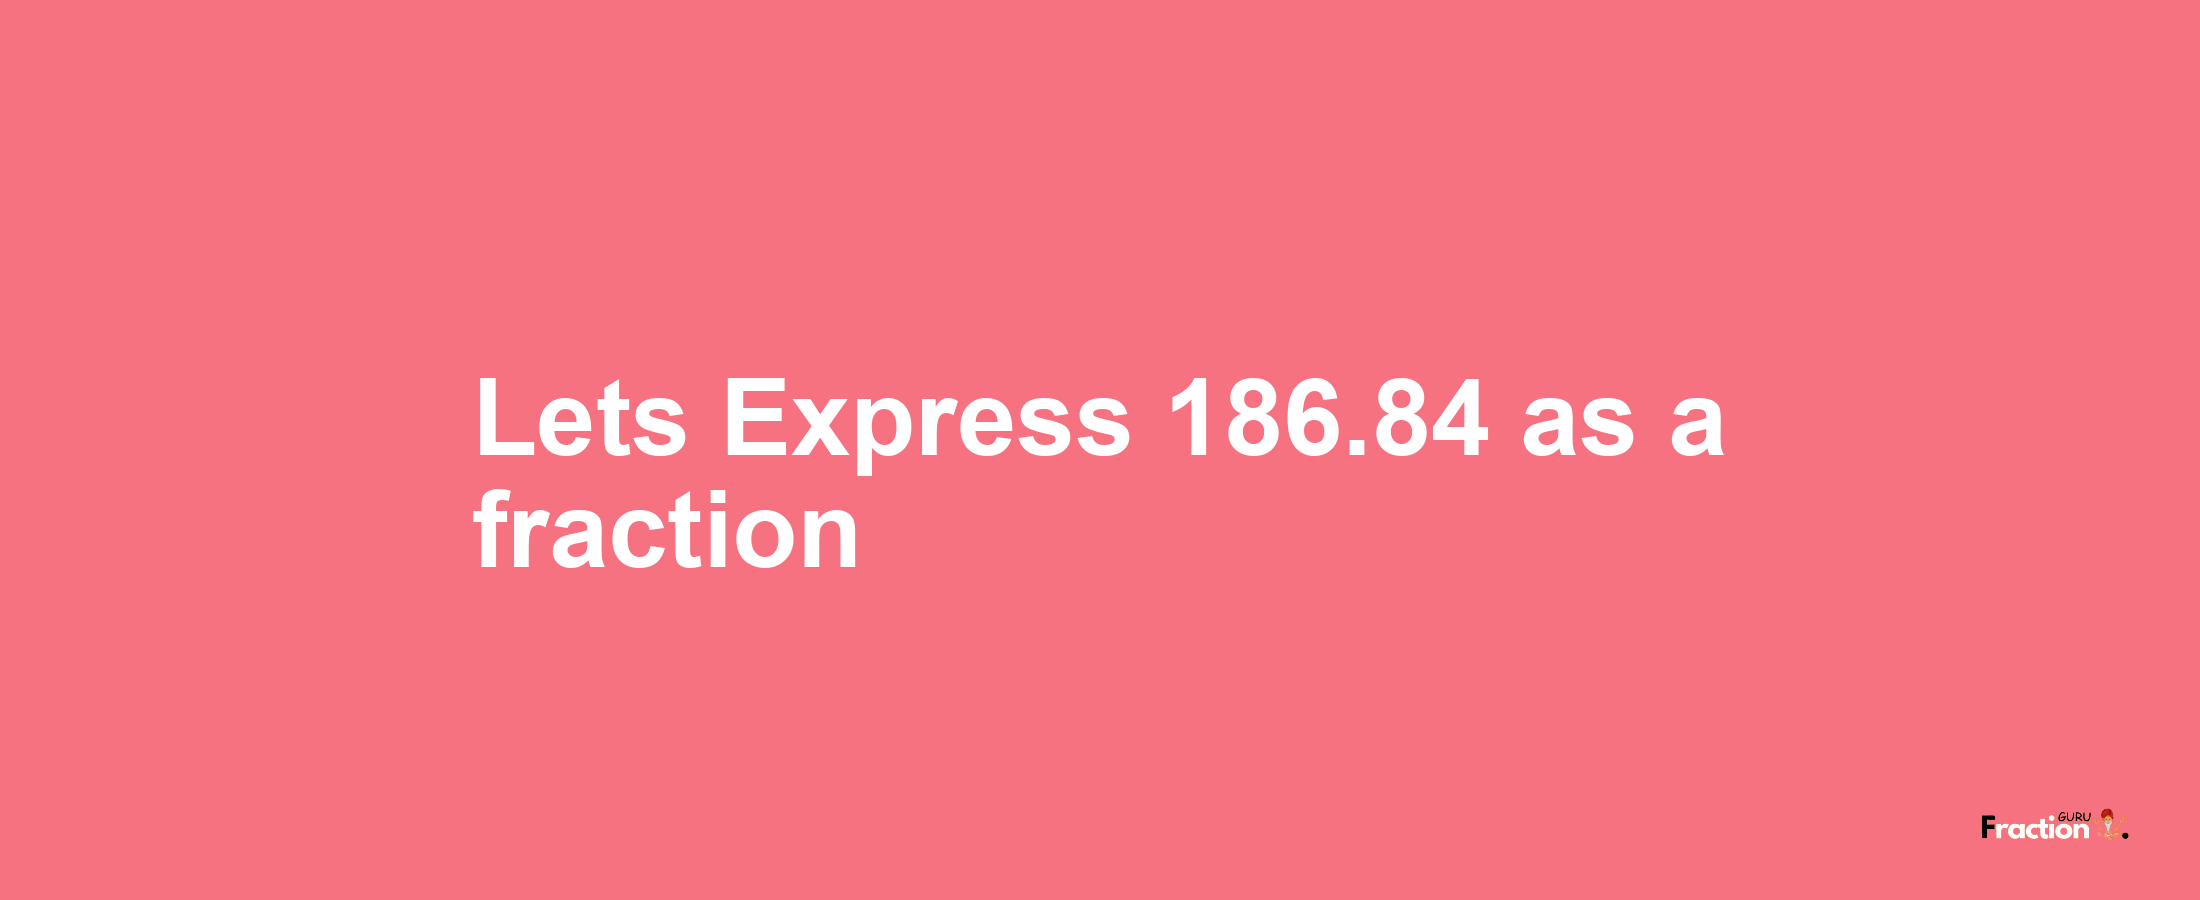 Lets Express 186.84 as afraction